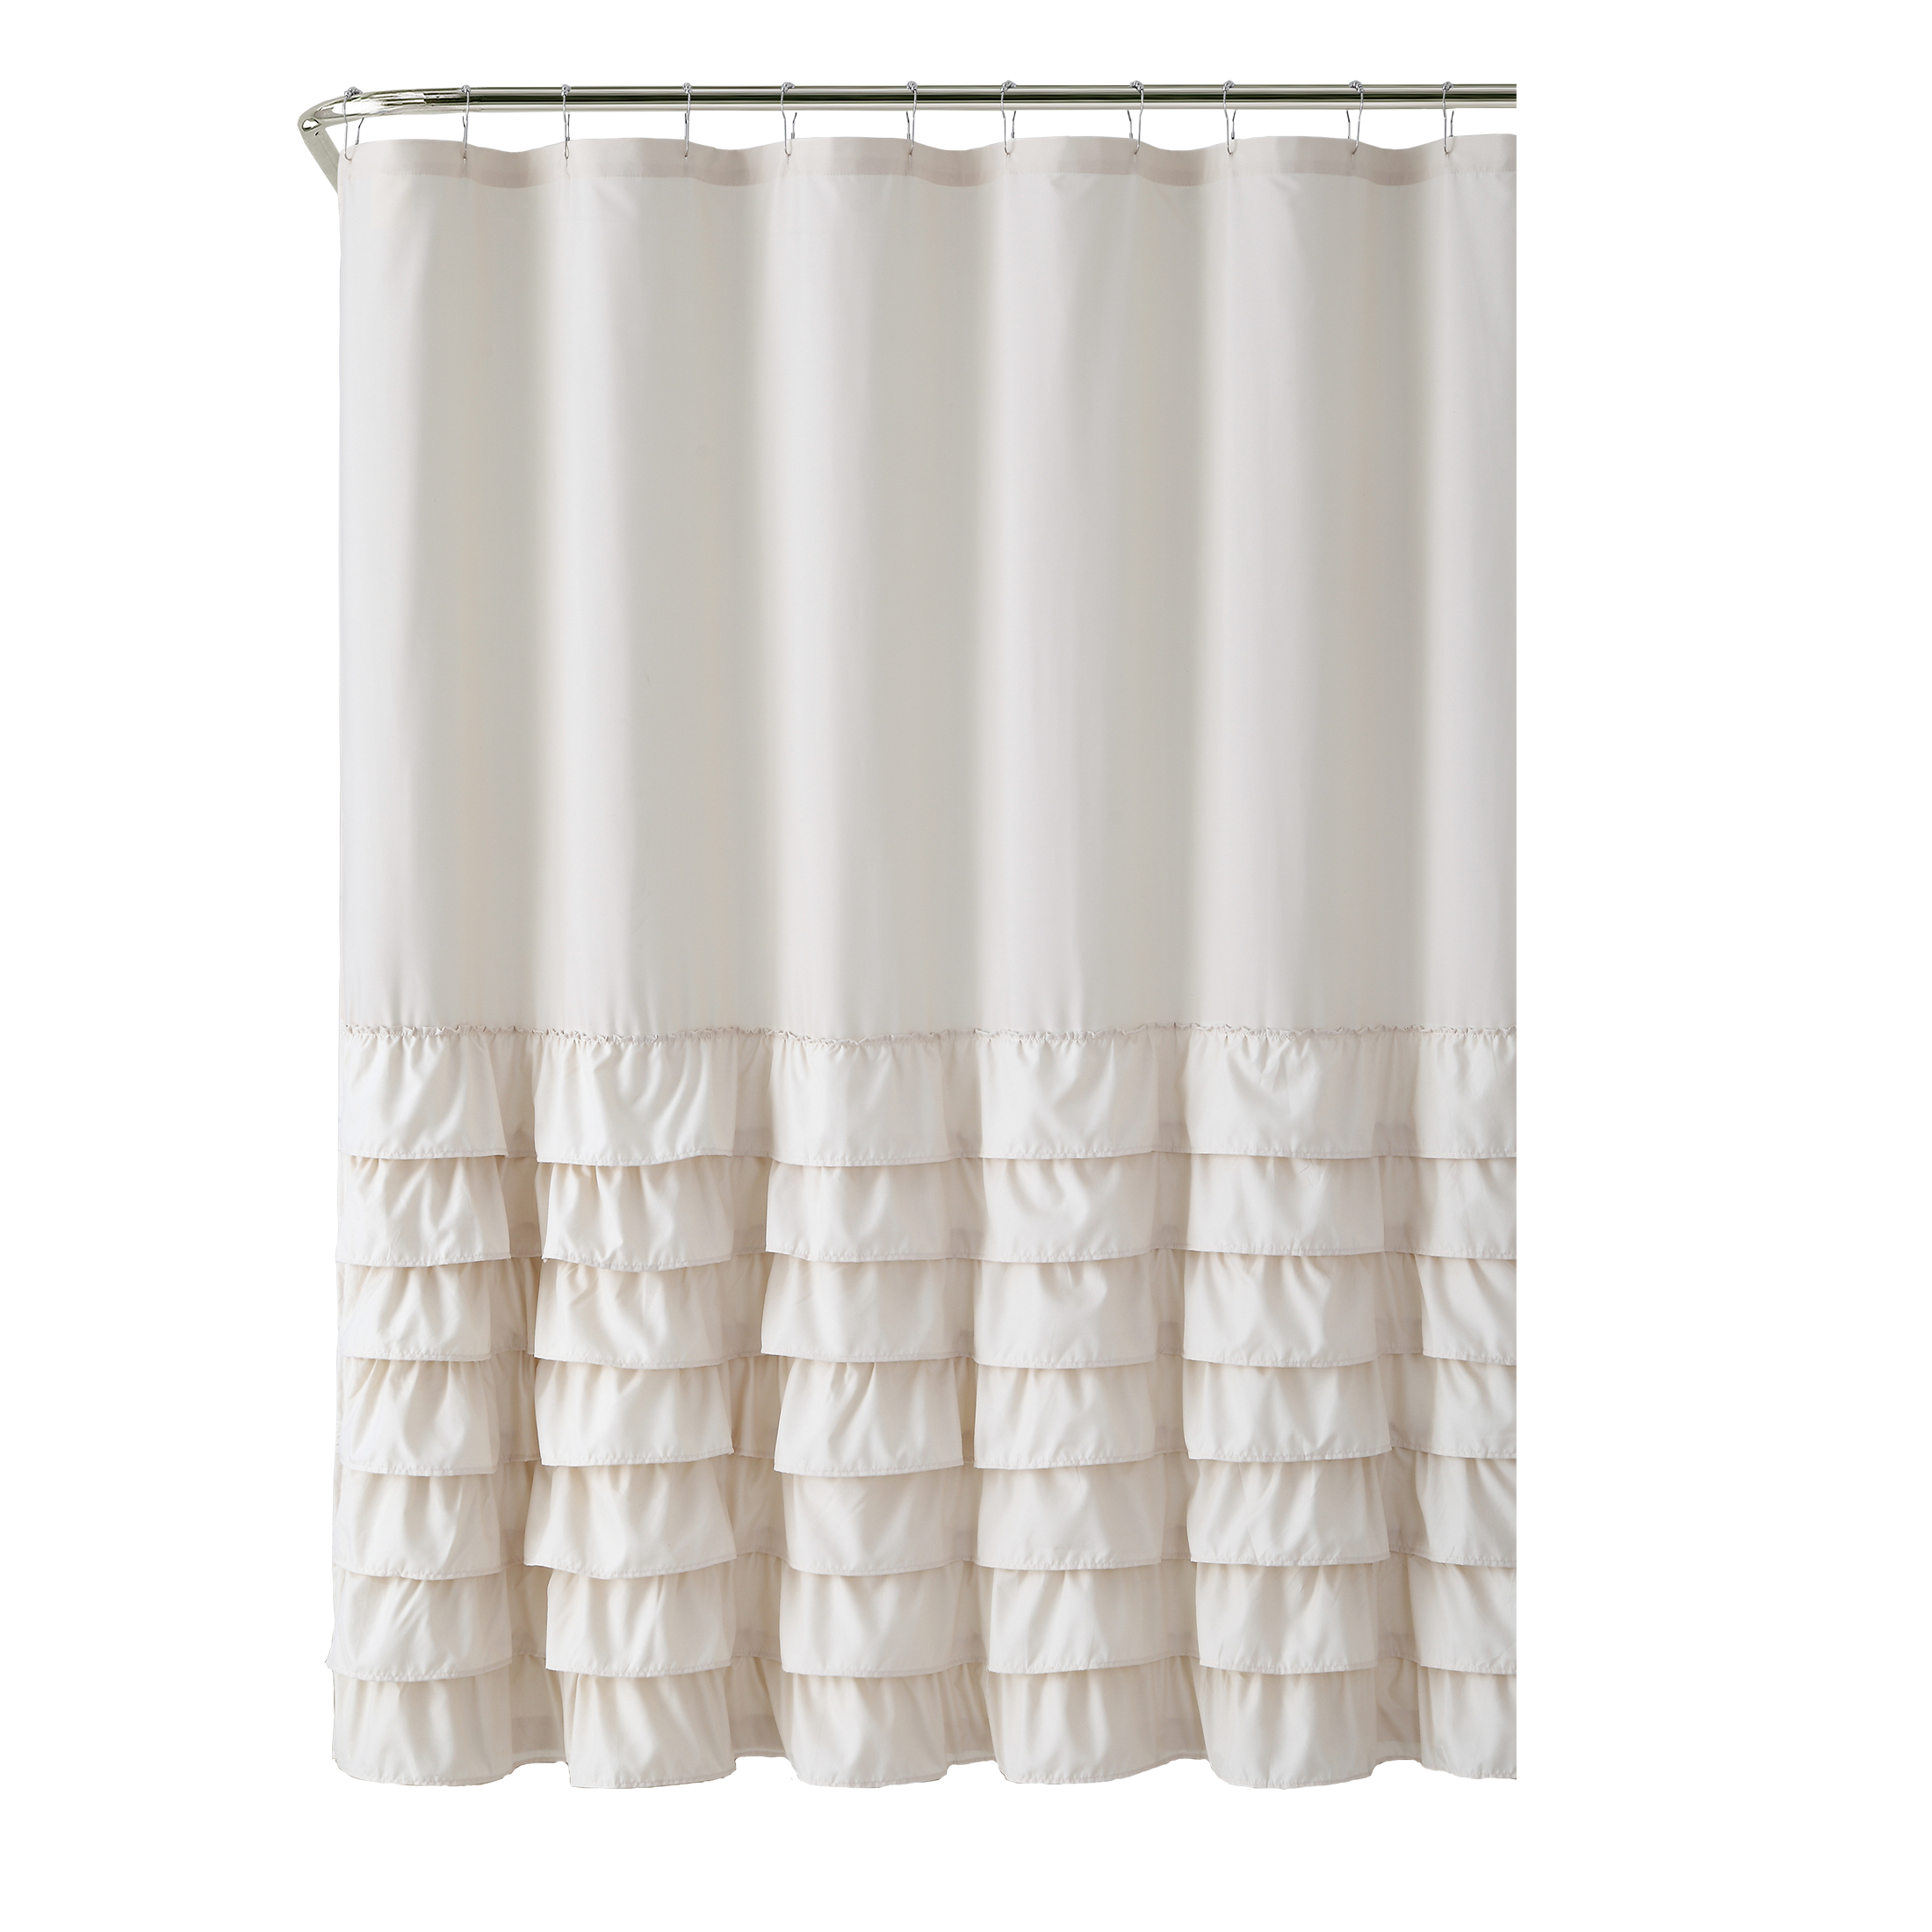 VCNY Home Melanie Taupe Solid Ruffle Polyester Shower Curtain, 72" x 72" - image 2 of 5